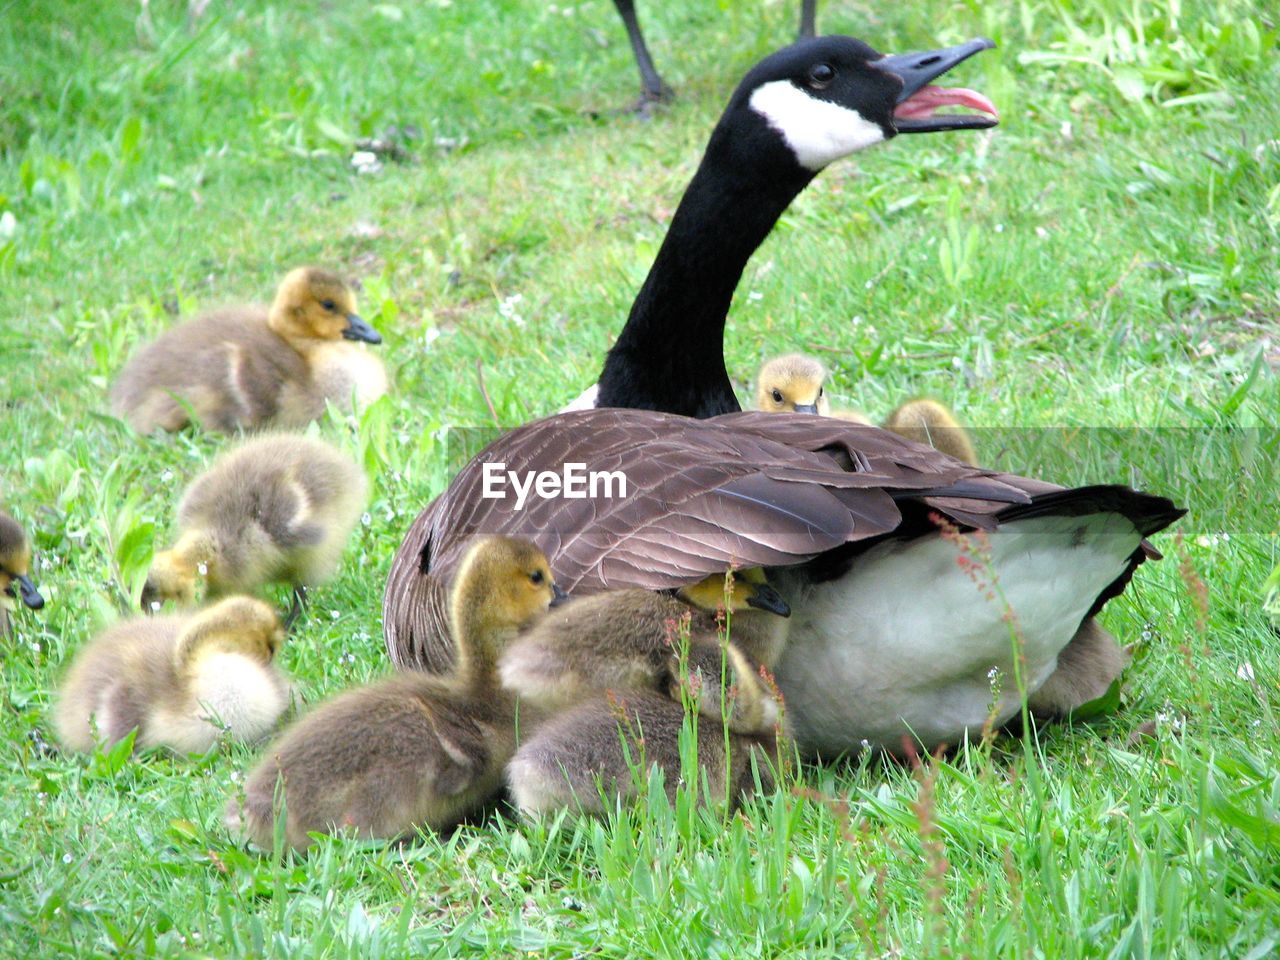 Canada goose with goslings on grassy field